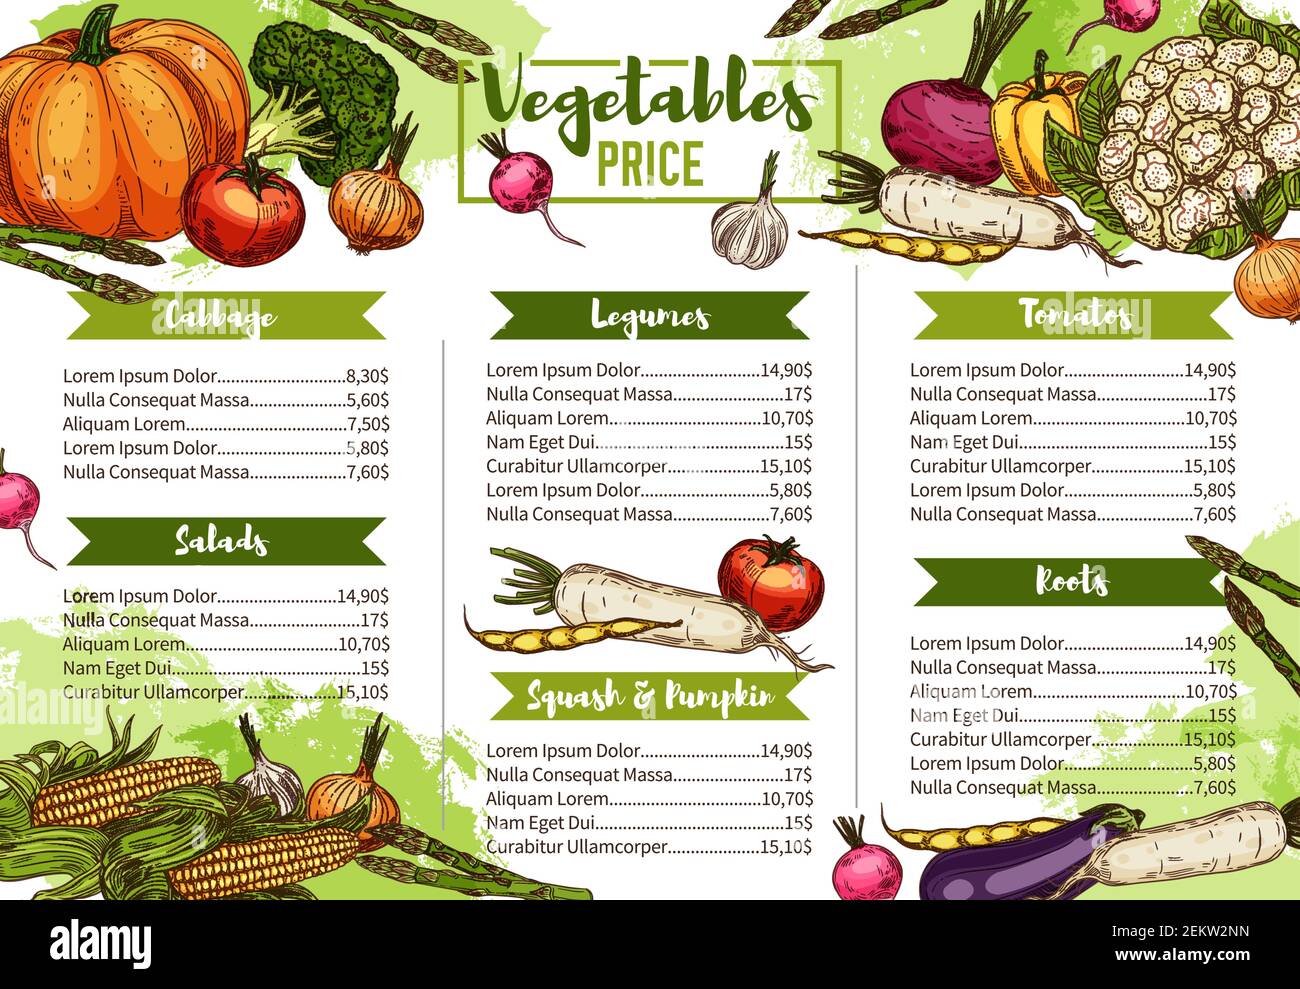 Vegetables, farm market veggies and organic vegetarian food menu price list. Vector dollar price for cabbages, salads and carrot and legumes, squash a Stock Vector